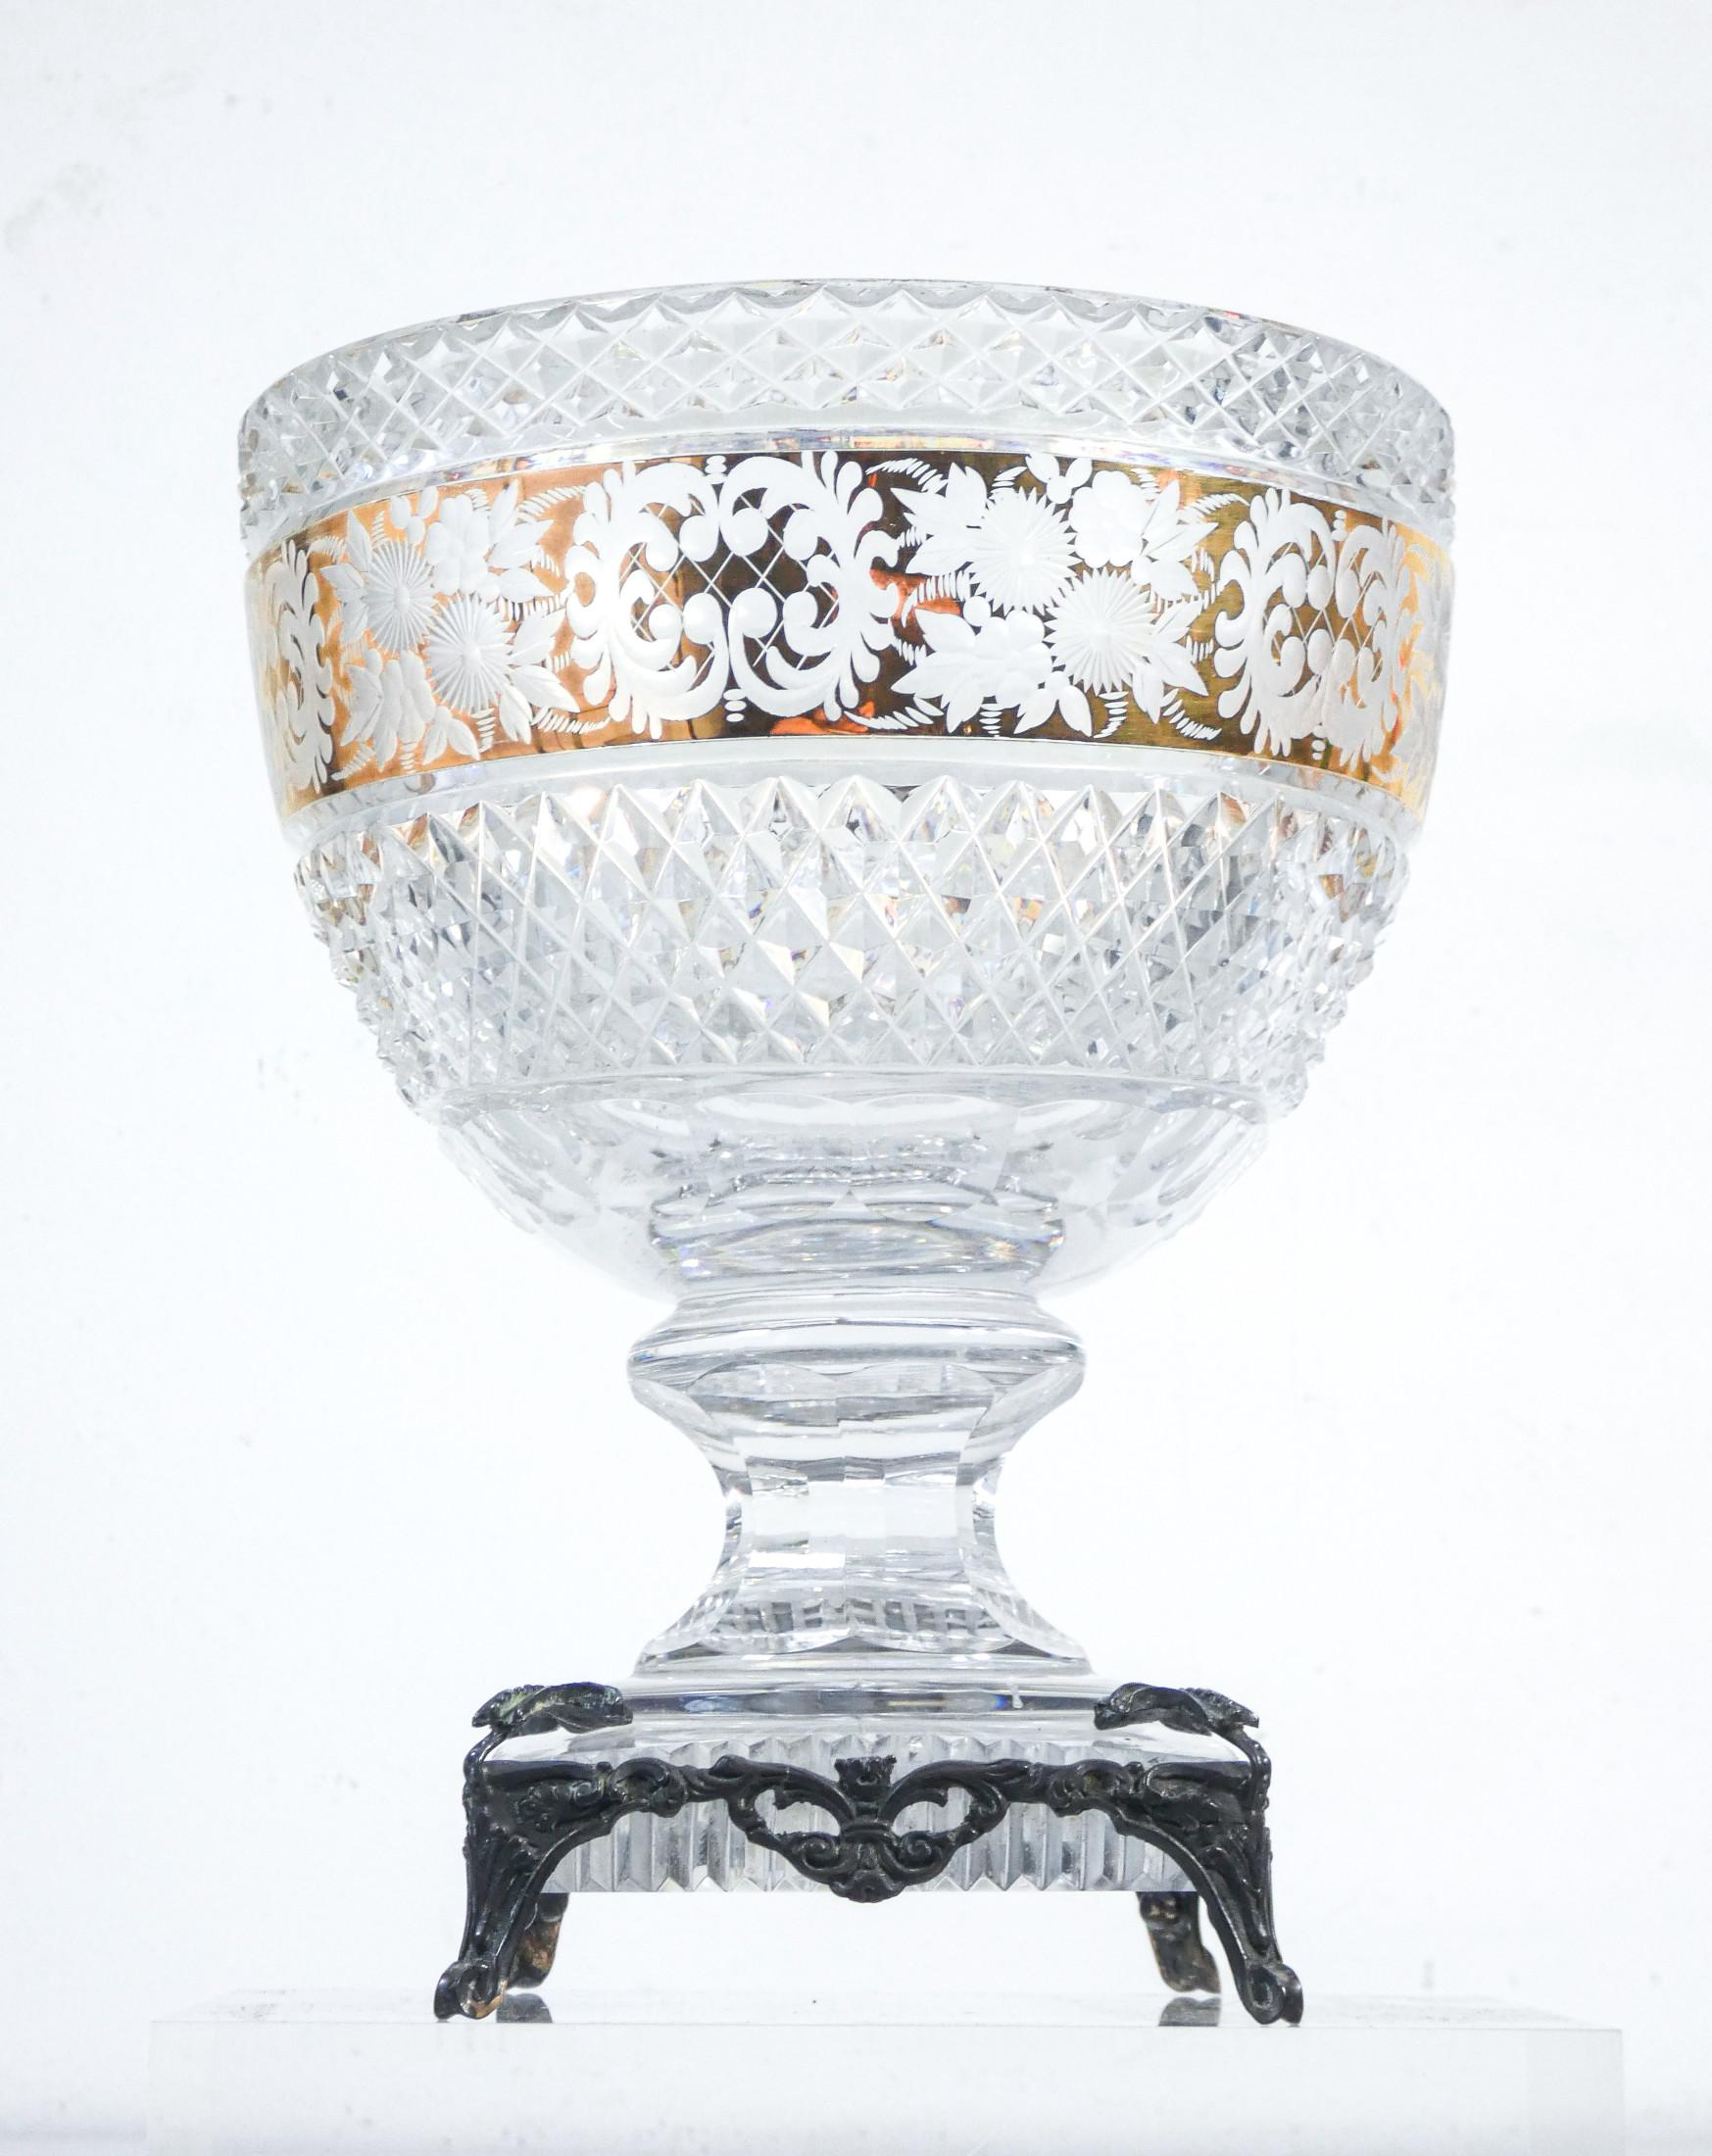 Vase, crystal bowl with silver base

PERIOD
Early twentieth century

TEMPLATE
Vase, cup

MATERIALS
Crystal, silver base, golden side band

DIMENSIONS
H 22 x Ø 17.5 cm

CONDITIONS
Perfect. No cracking or chipping. Evaluate through the